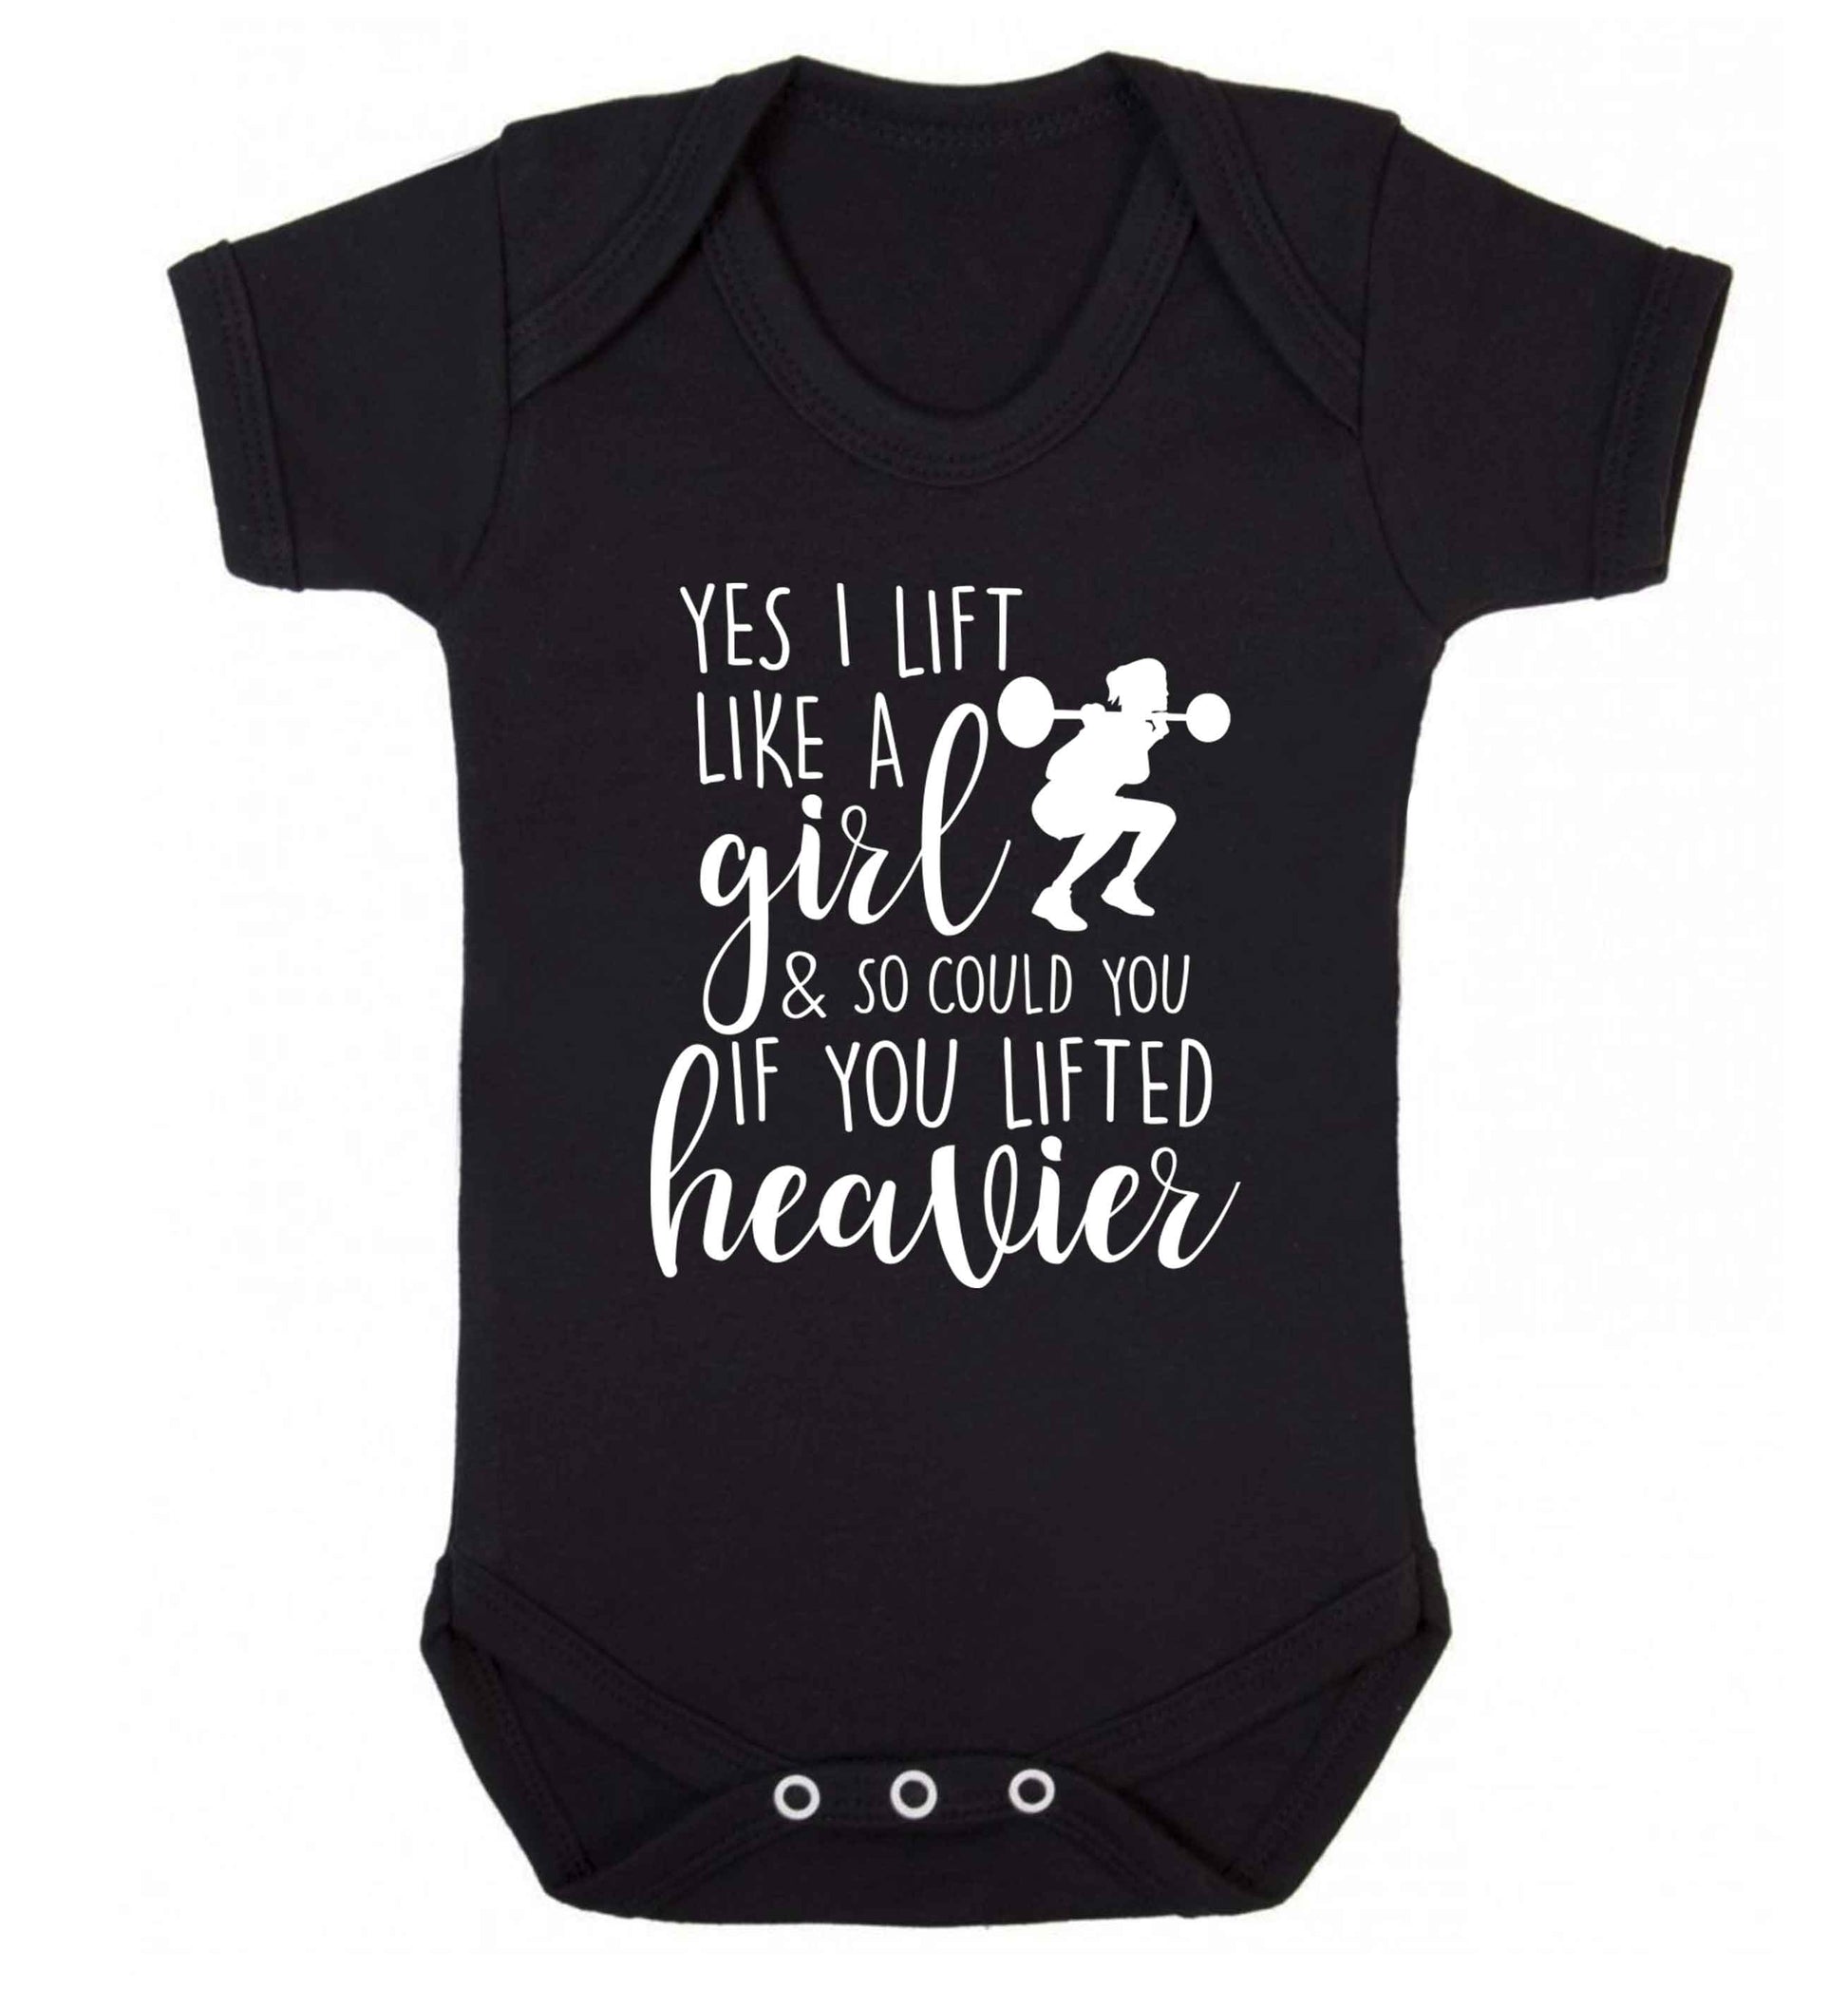 Yes I lift like a girl and so could you if you lifted heavier Baby Vest black 18-24 months